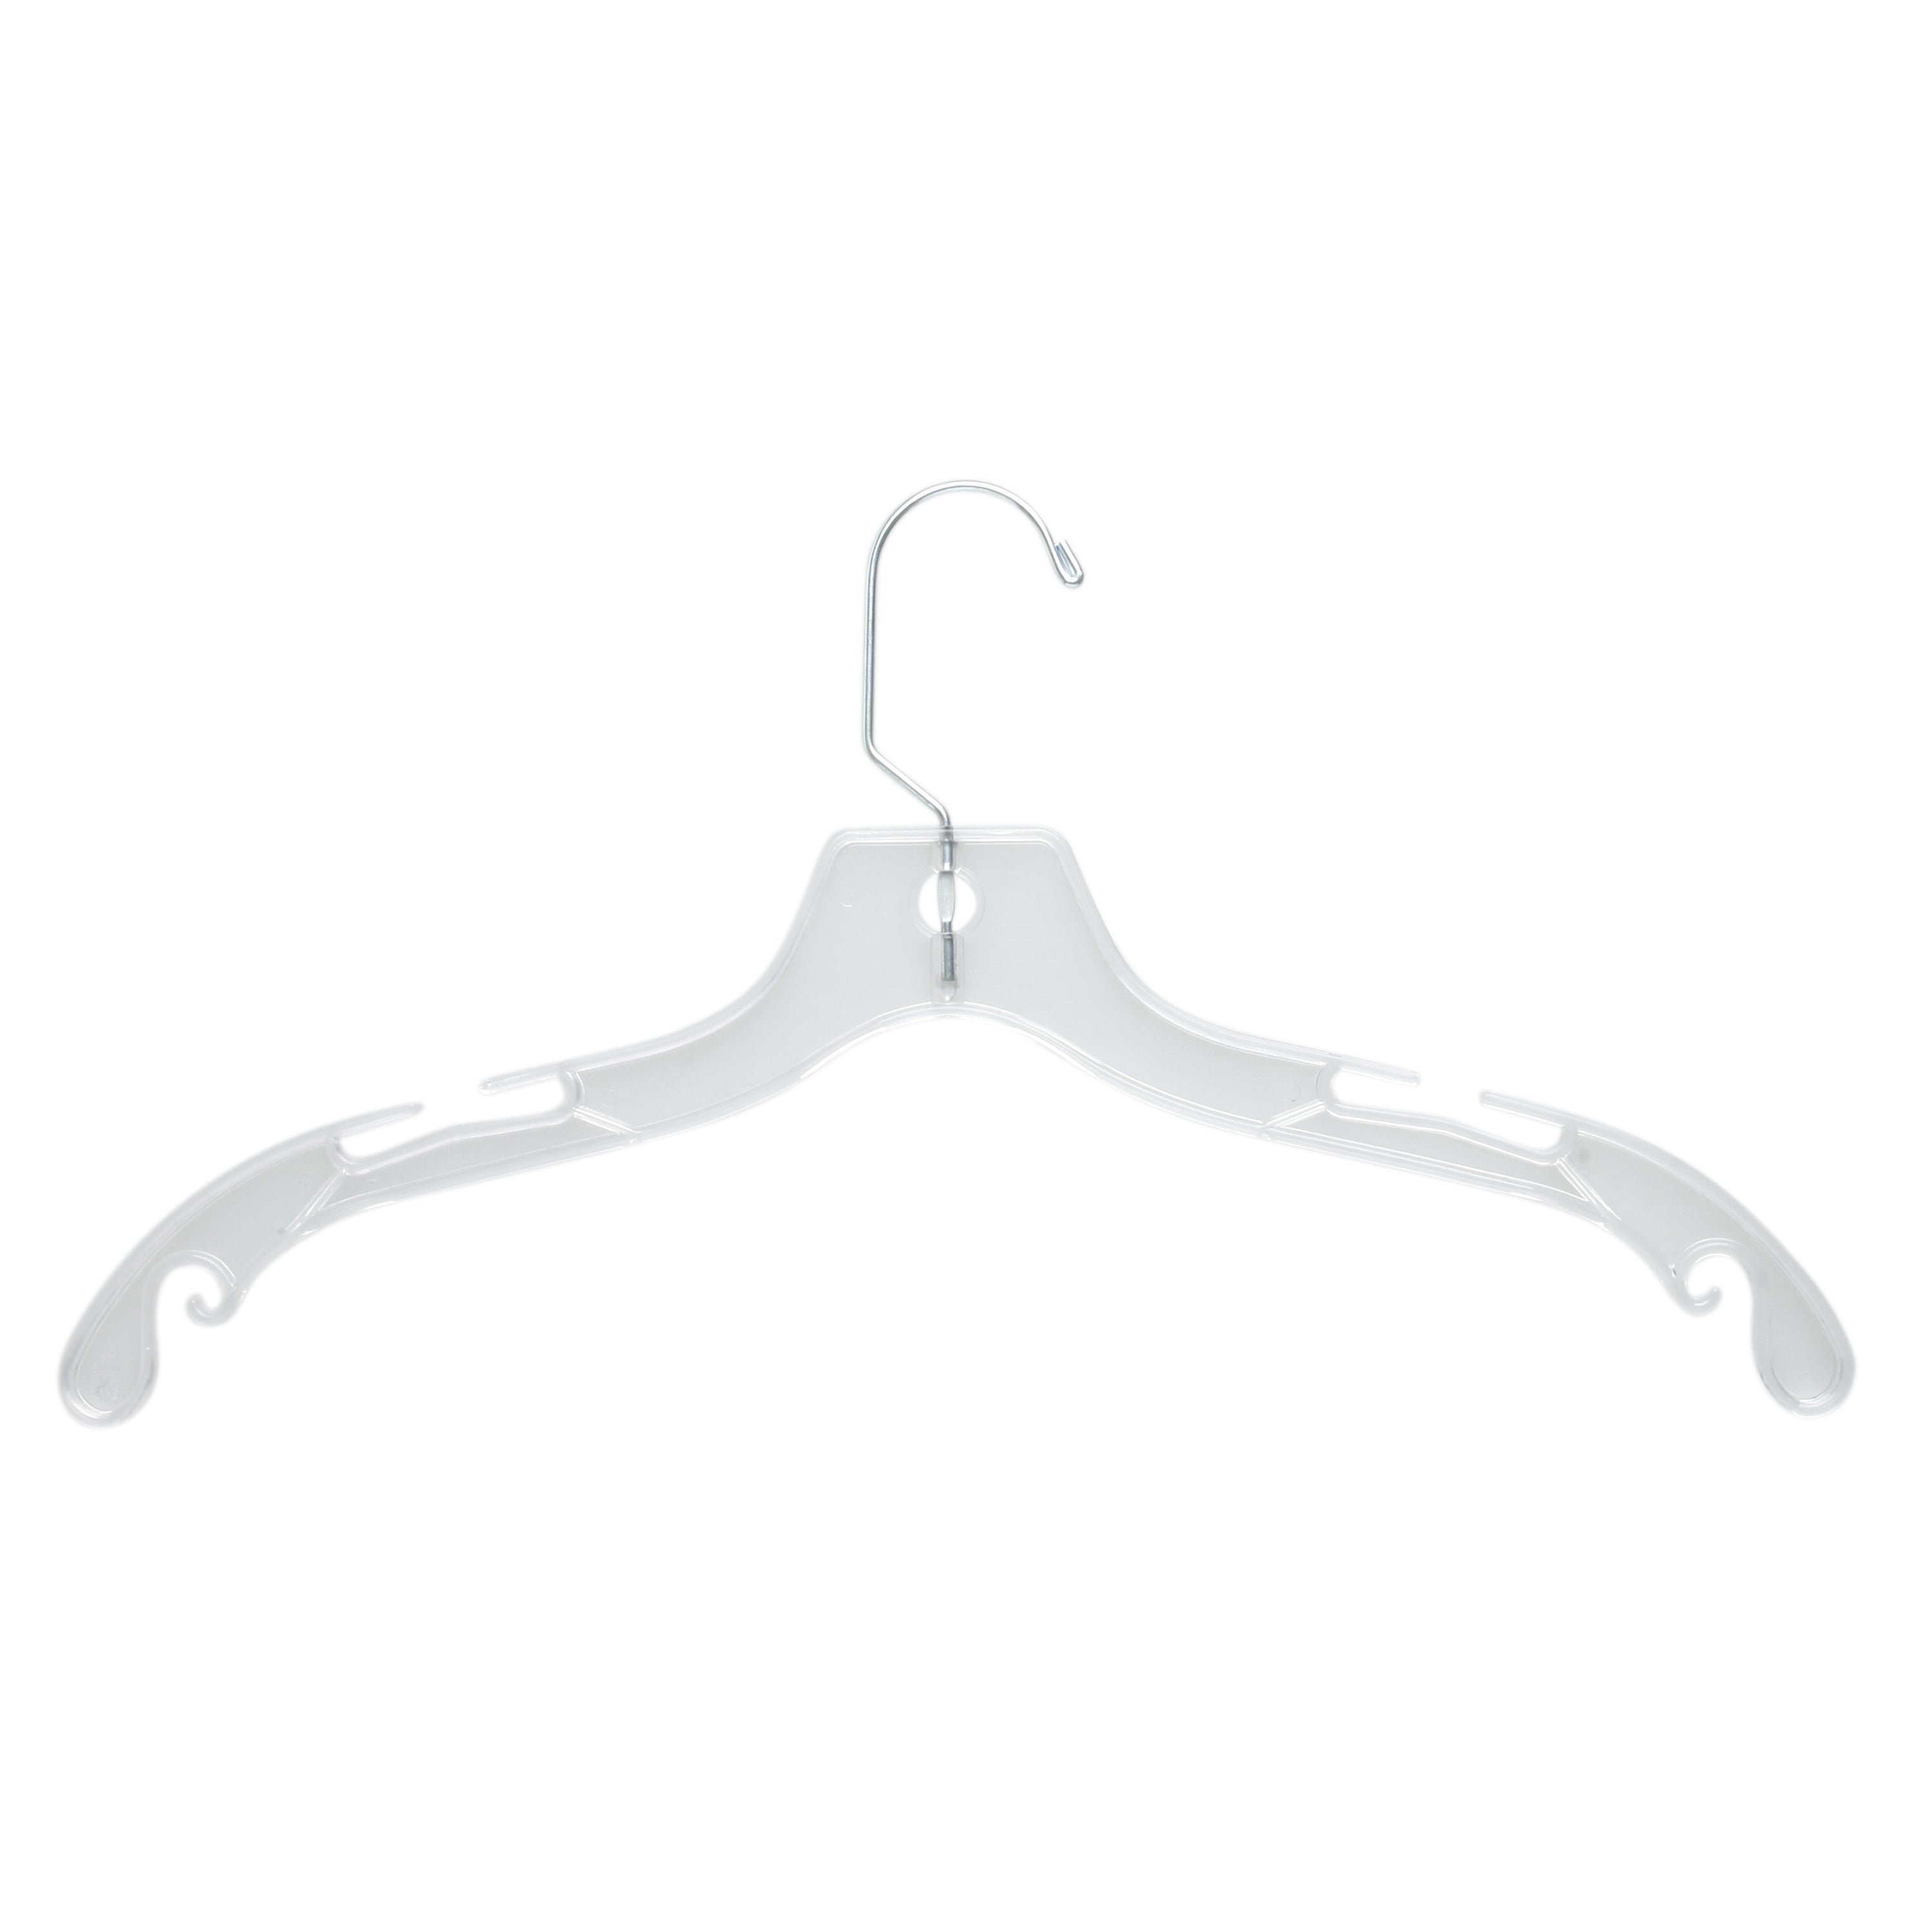 Hangers – Plastic Hanger - Hangers for Clothes - Good Quality Pack